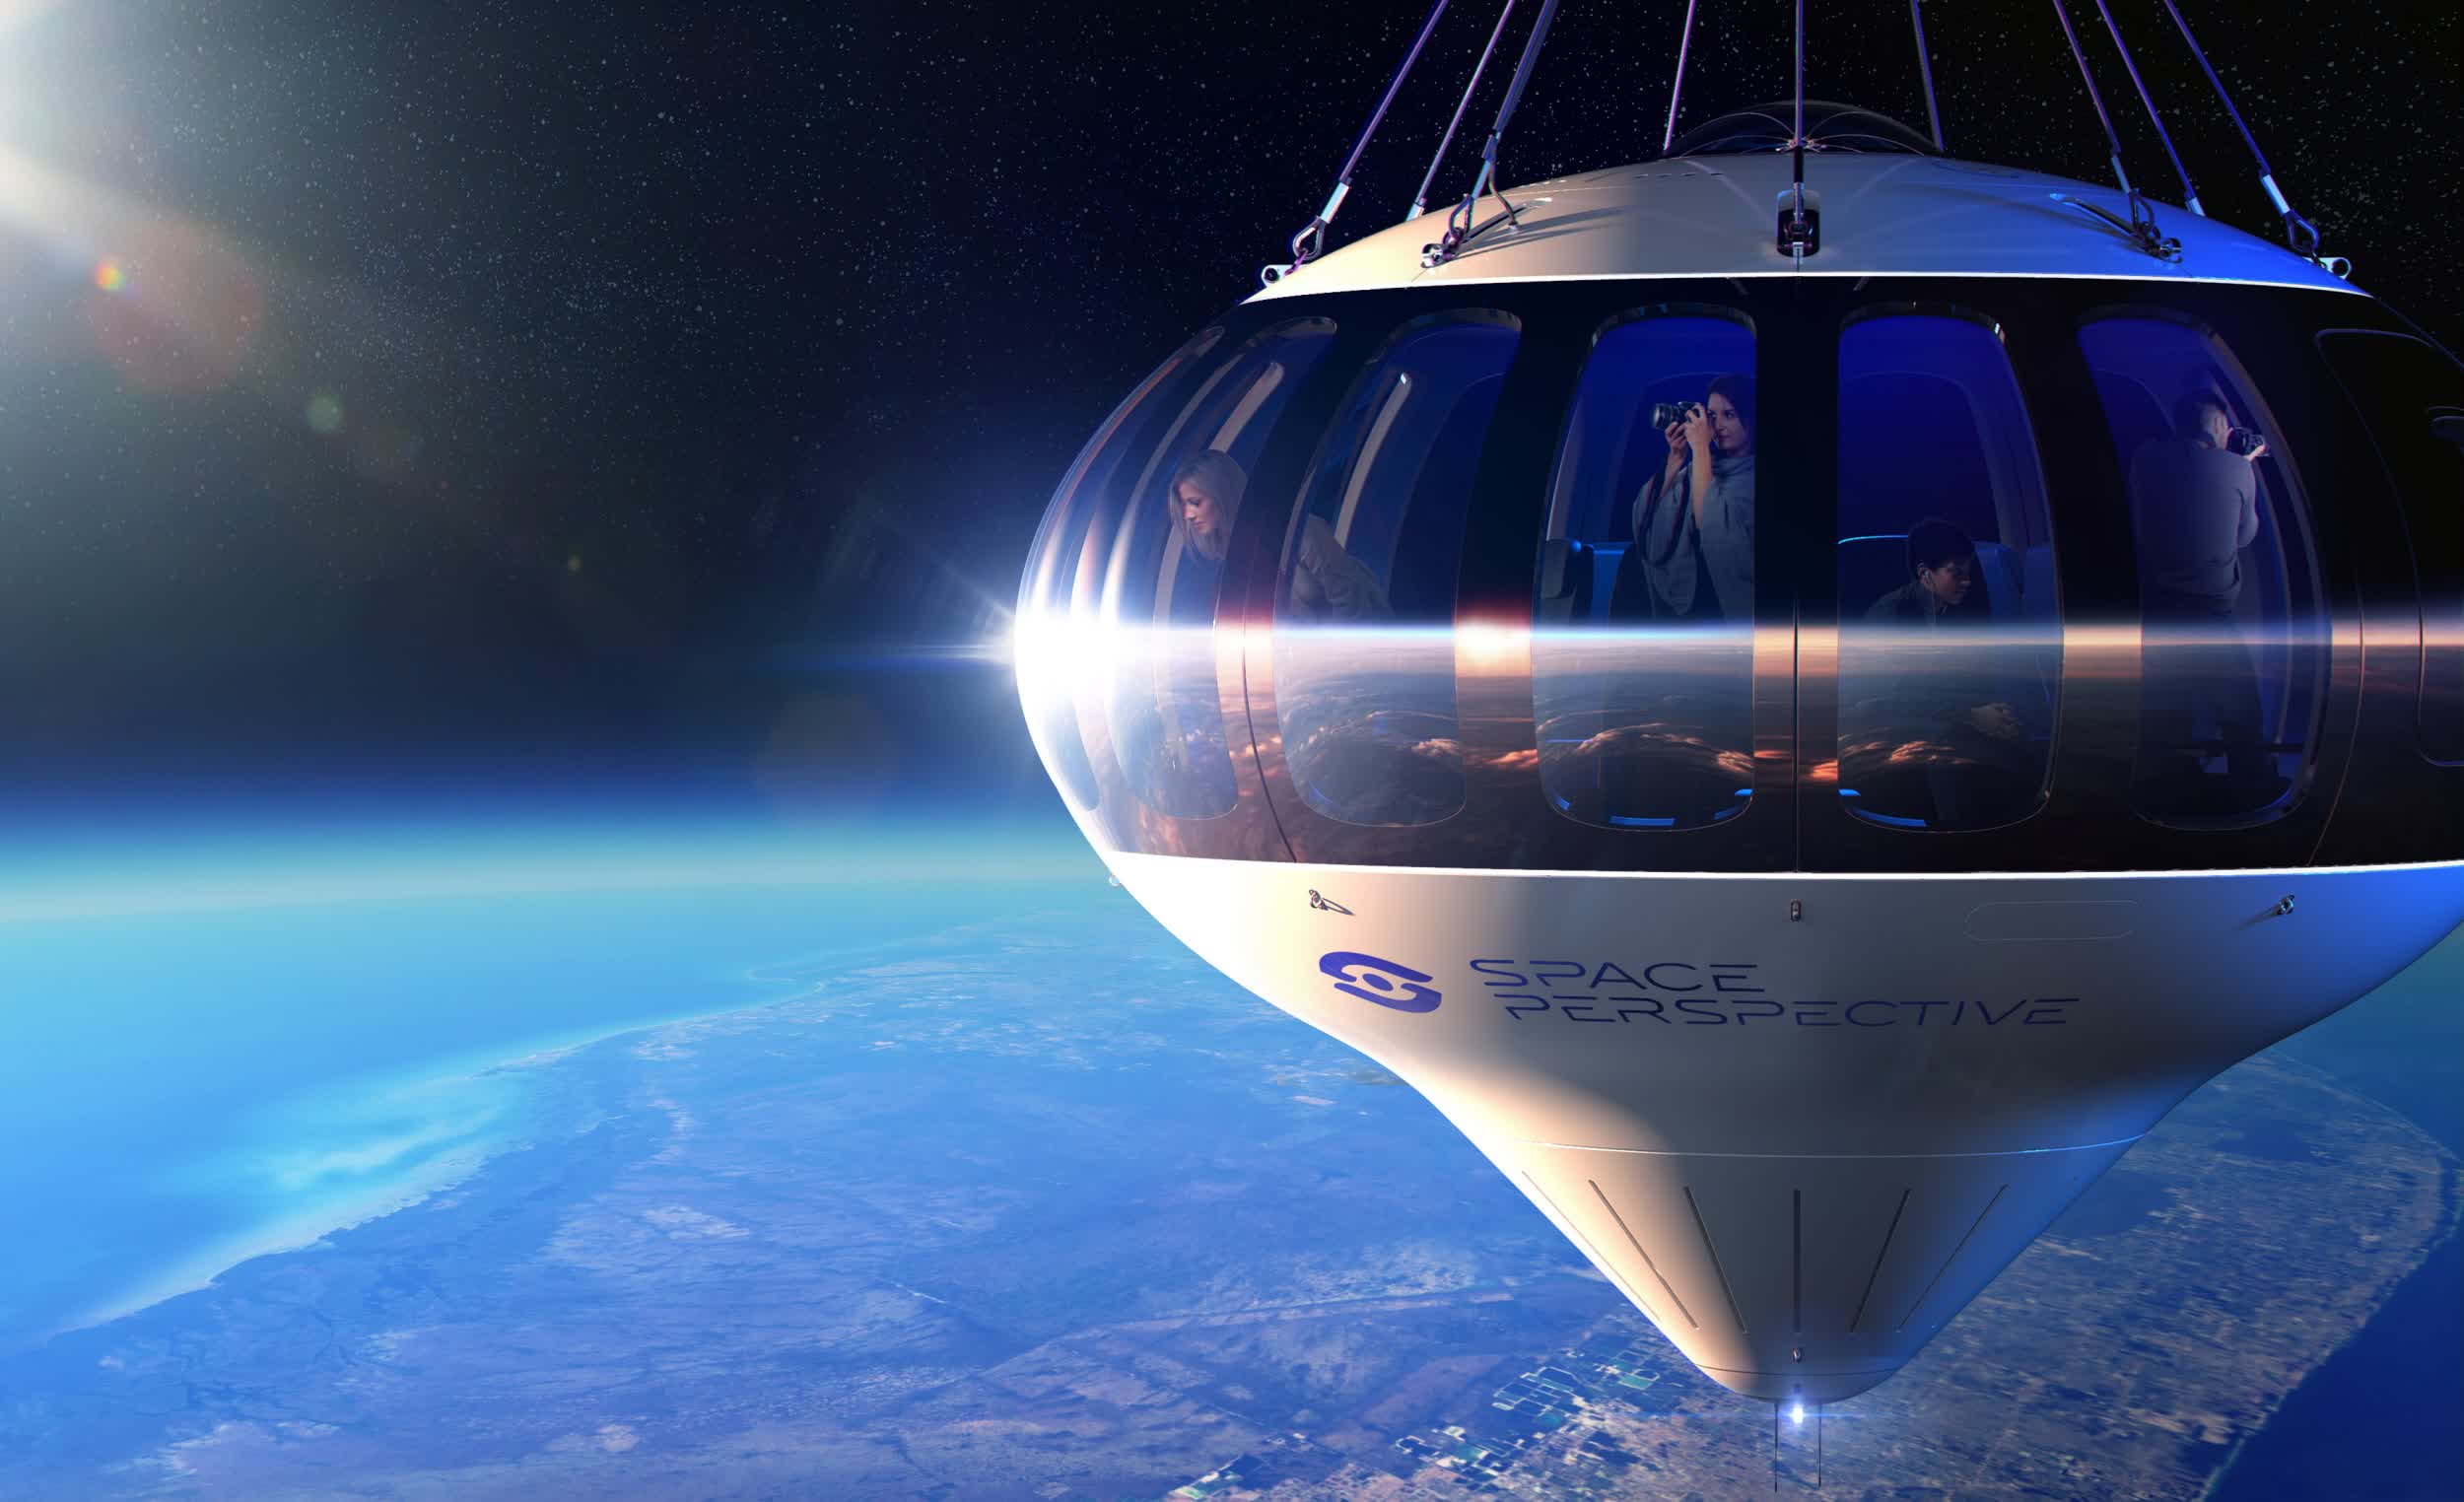 Space Perspective shows off swanky Space Lounge interior